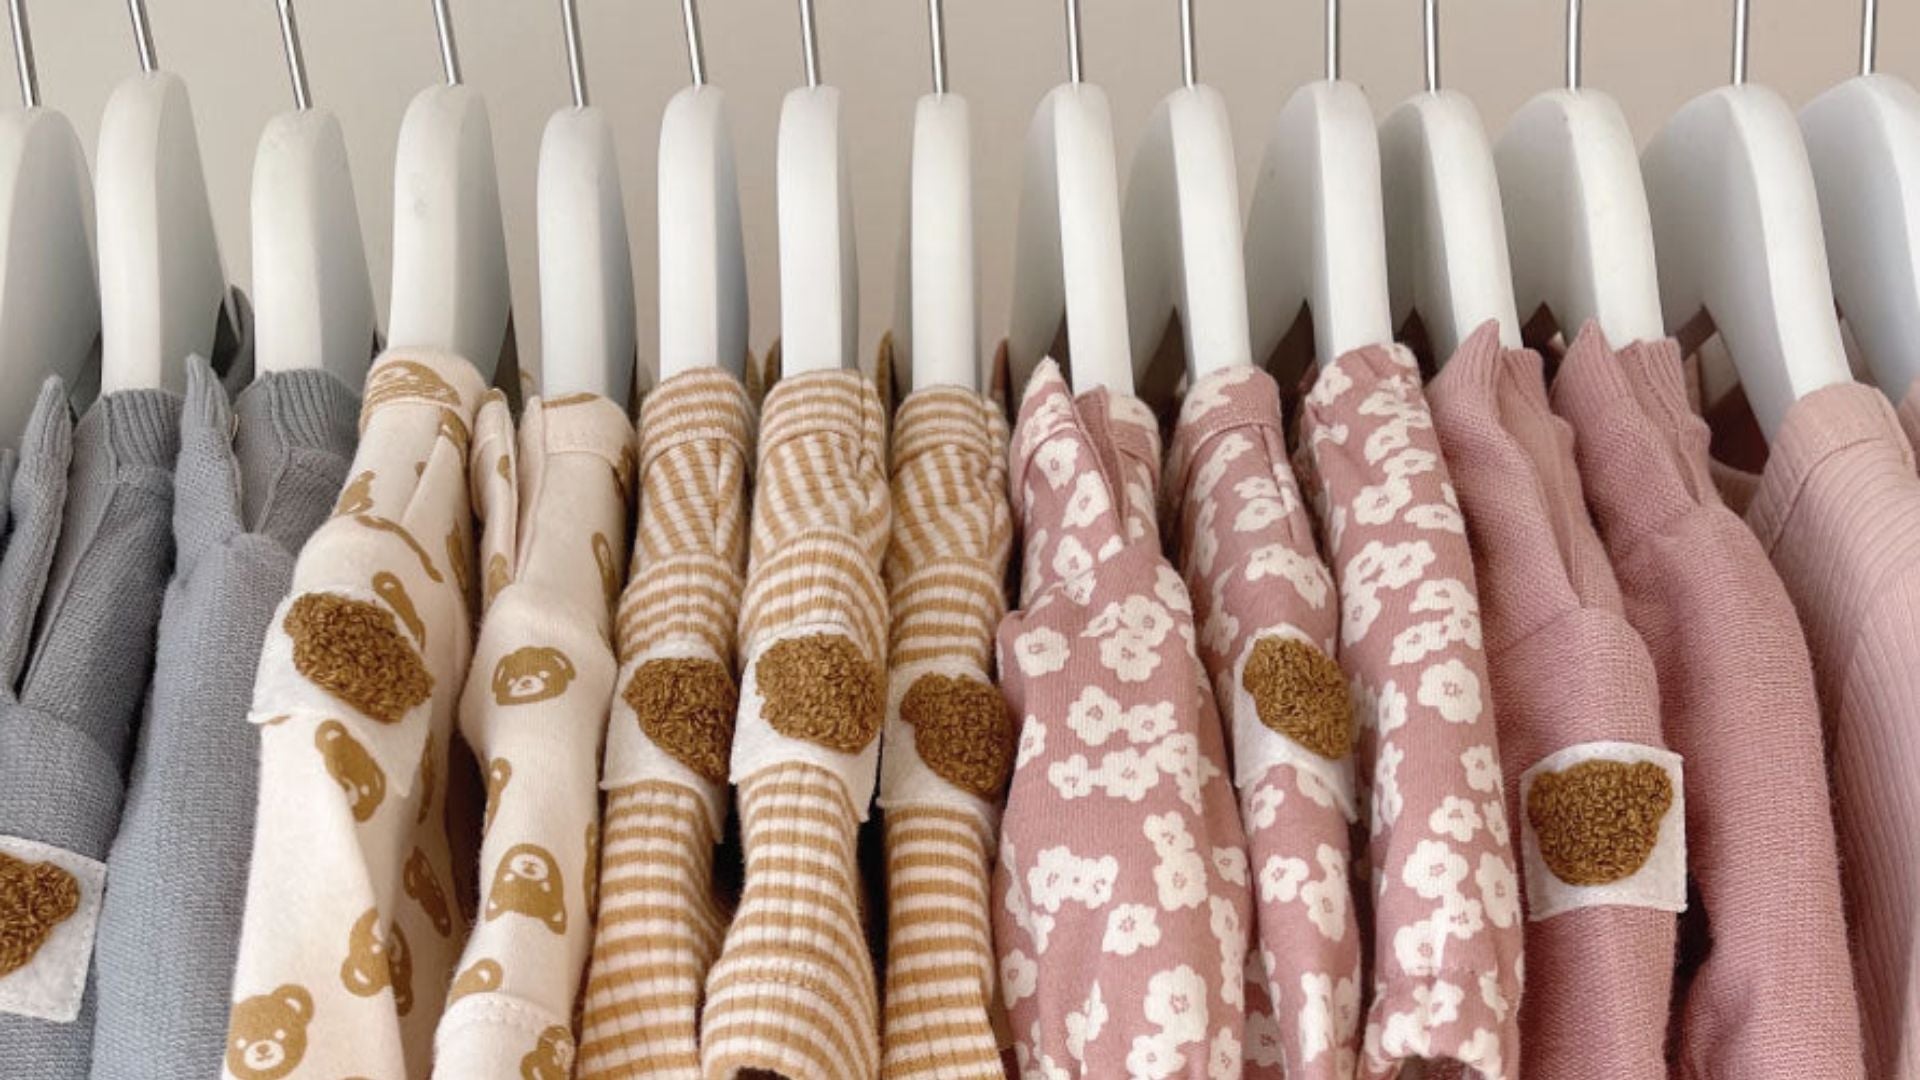 A rack of sustainable kids clothing on hangers